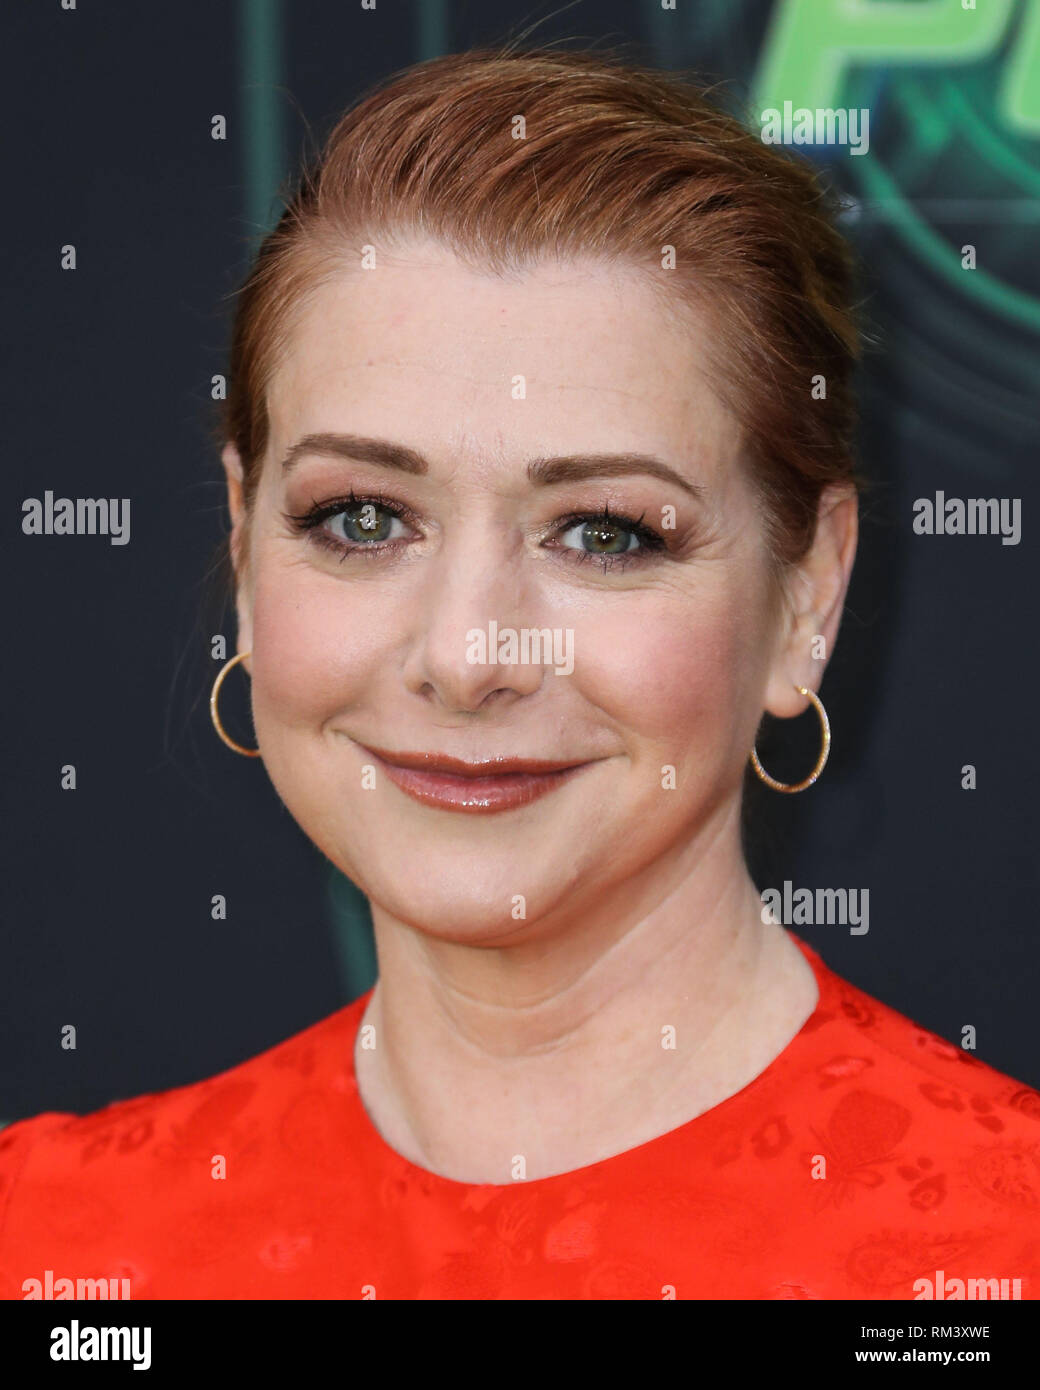 Los Angeles, North Hollywood, United States. 12th Feb, 2019. Los Angeles, NORTH HOLLYWOOD, LOS ANGELES, CA, USA - FEBRUARY 12: Actress Alyson Hannigan arrives at the Los Angeles Premiere Of Disney Channel's 'Kim Possible' held at the Saban Media Center at the Television Academy on February 12, 2019 in North Hollywood, Los Angeles, California, United States. (Photo by Xavier Collin/Image Press Agency) Stock Photo